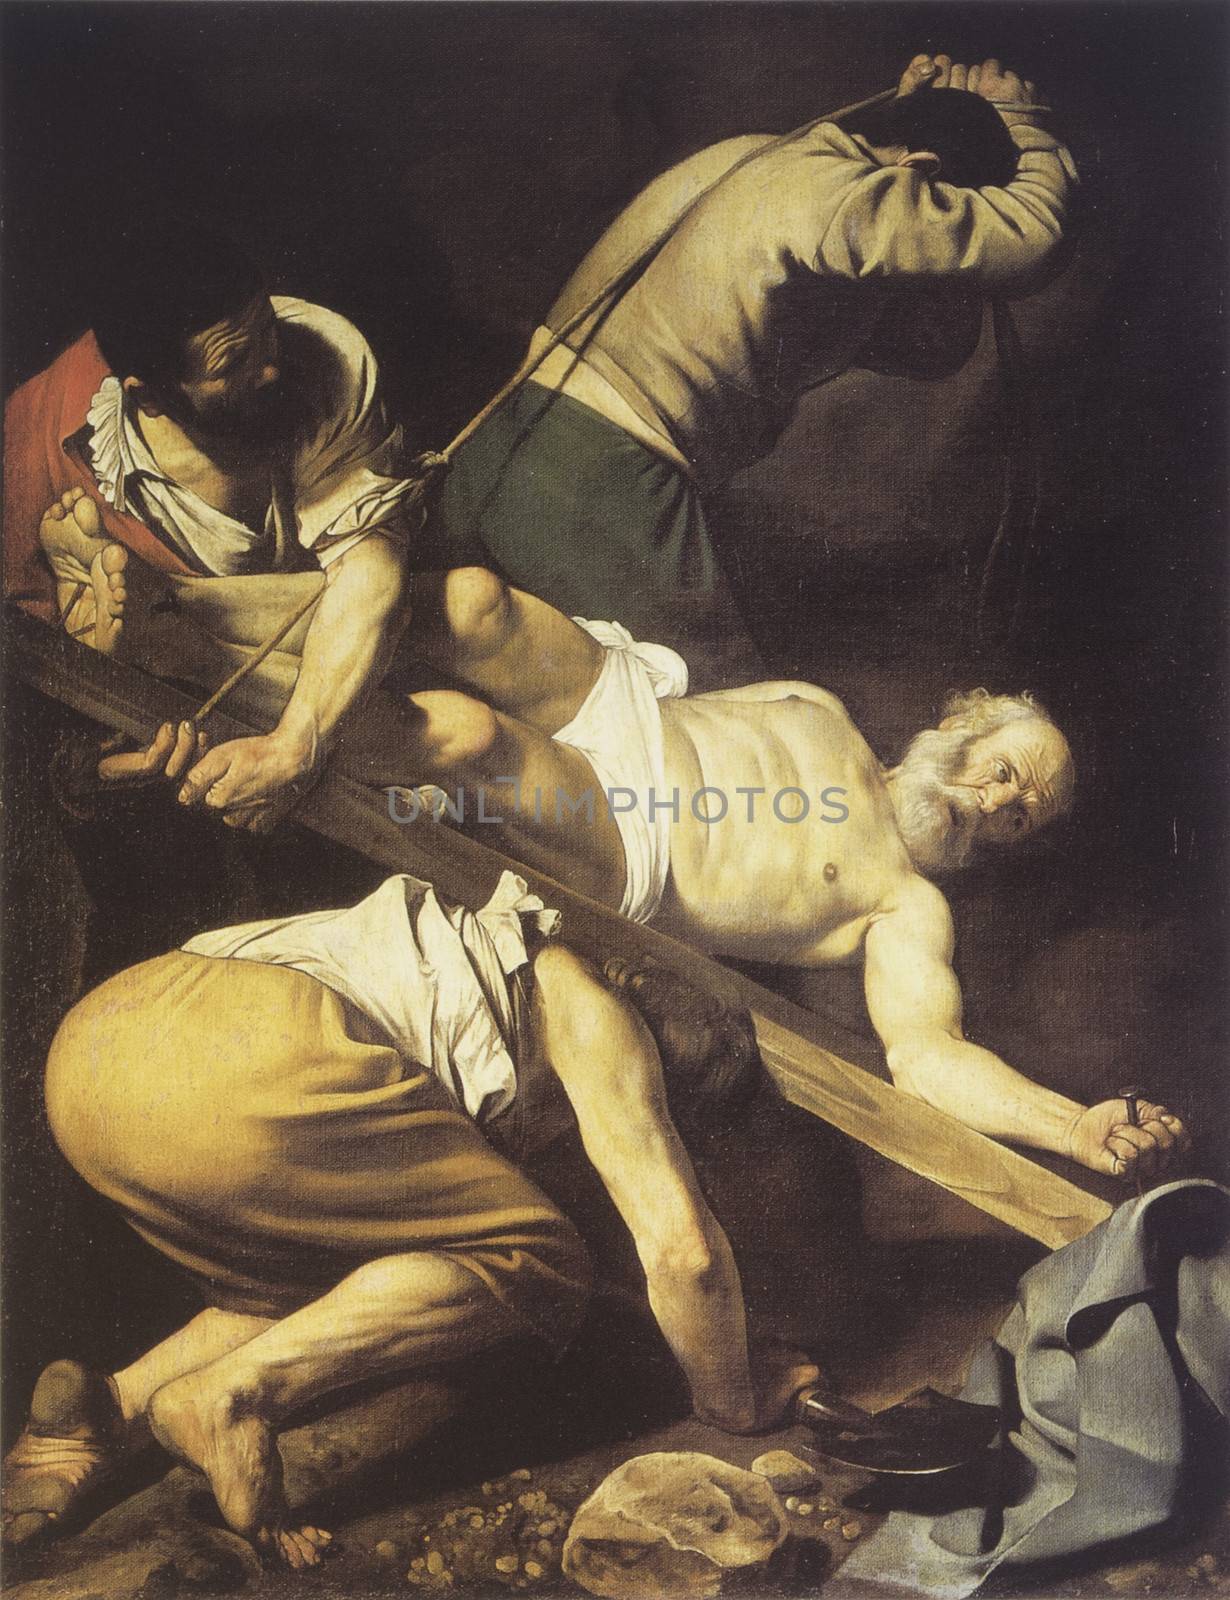 Martyrdom of Saint Peter, work of Caravaggio in 1601